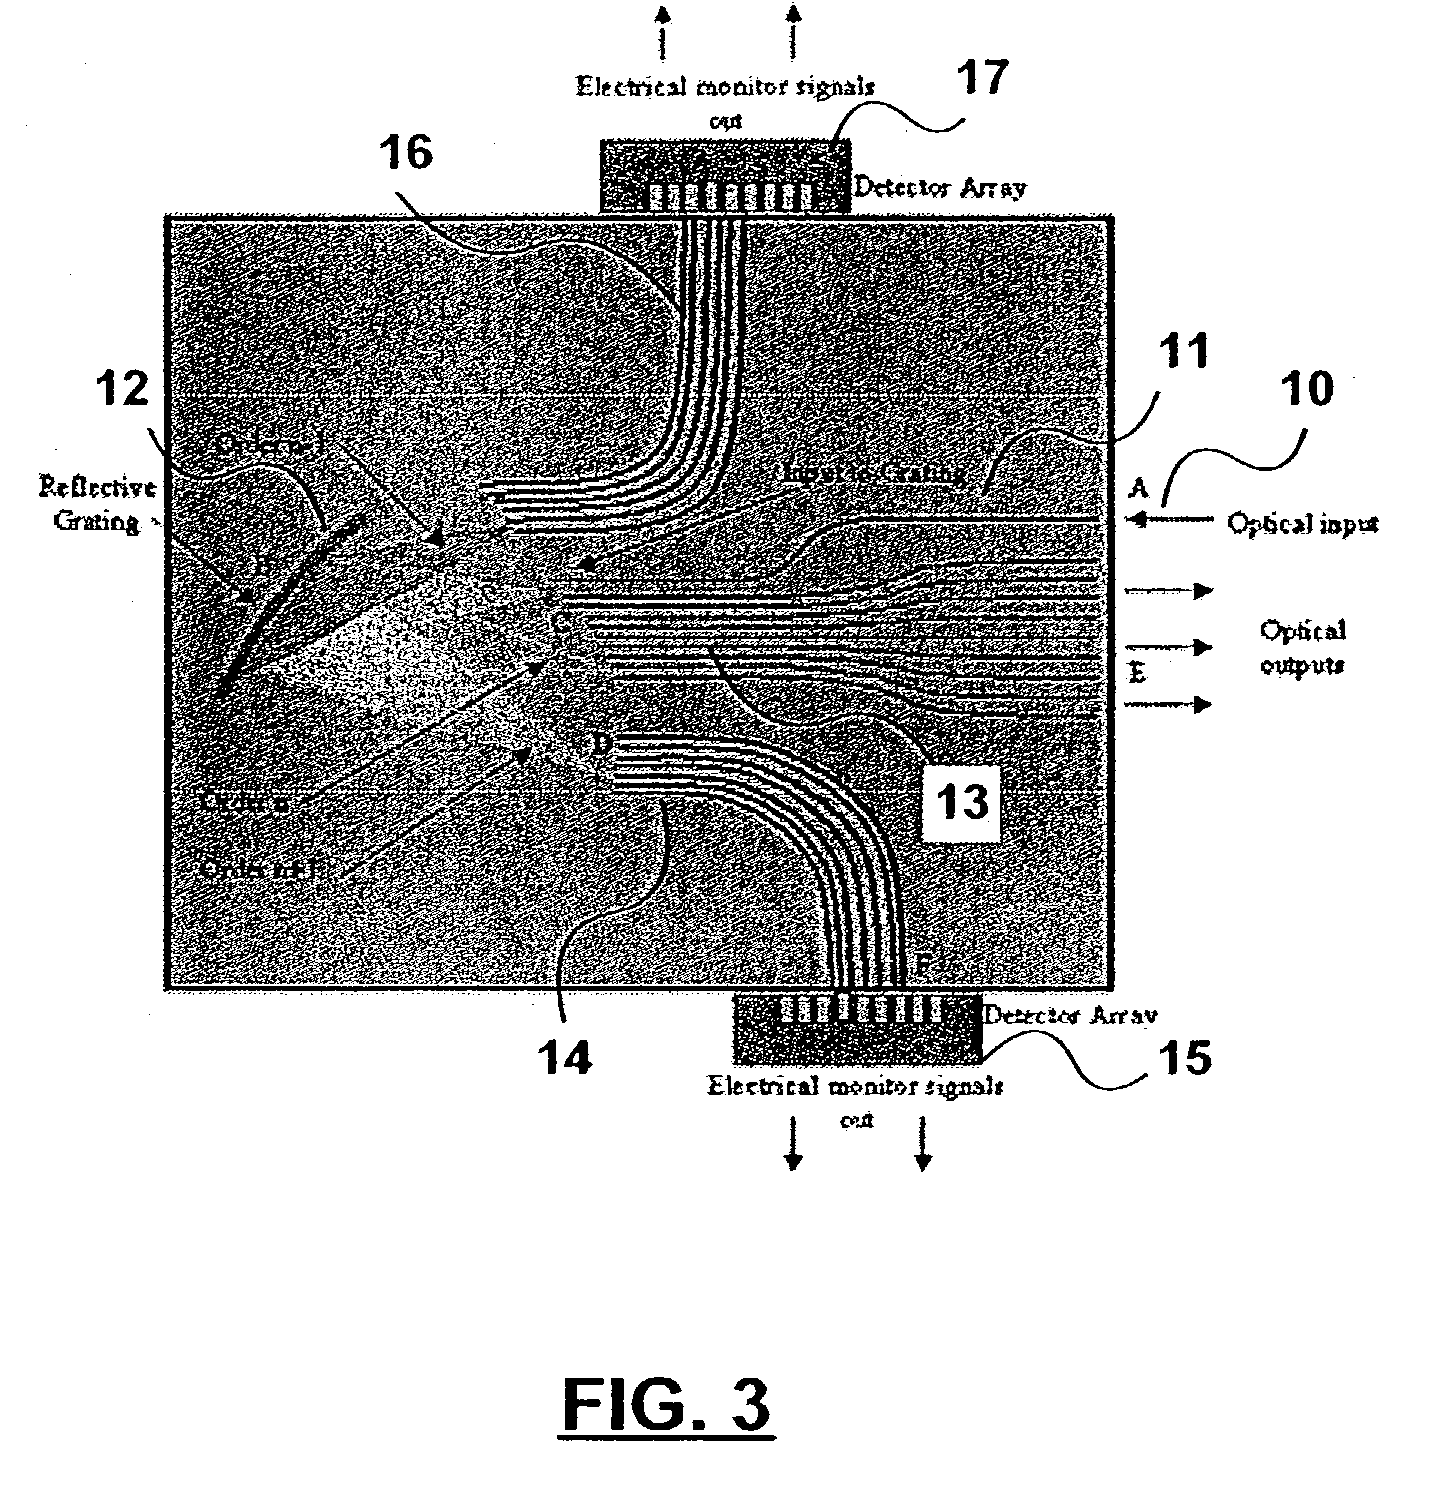 Device for integrating demultiplexing and optical channel monitoring